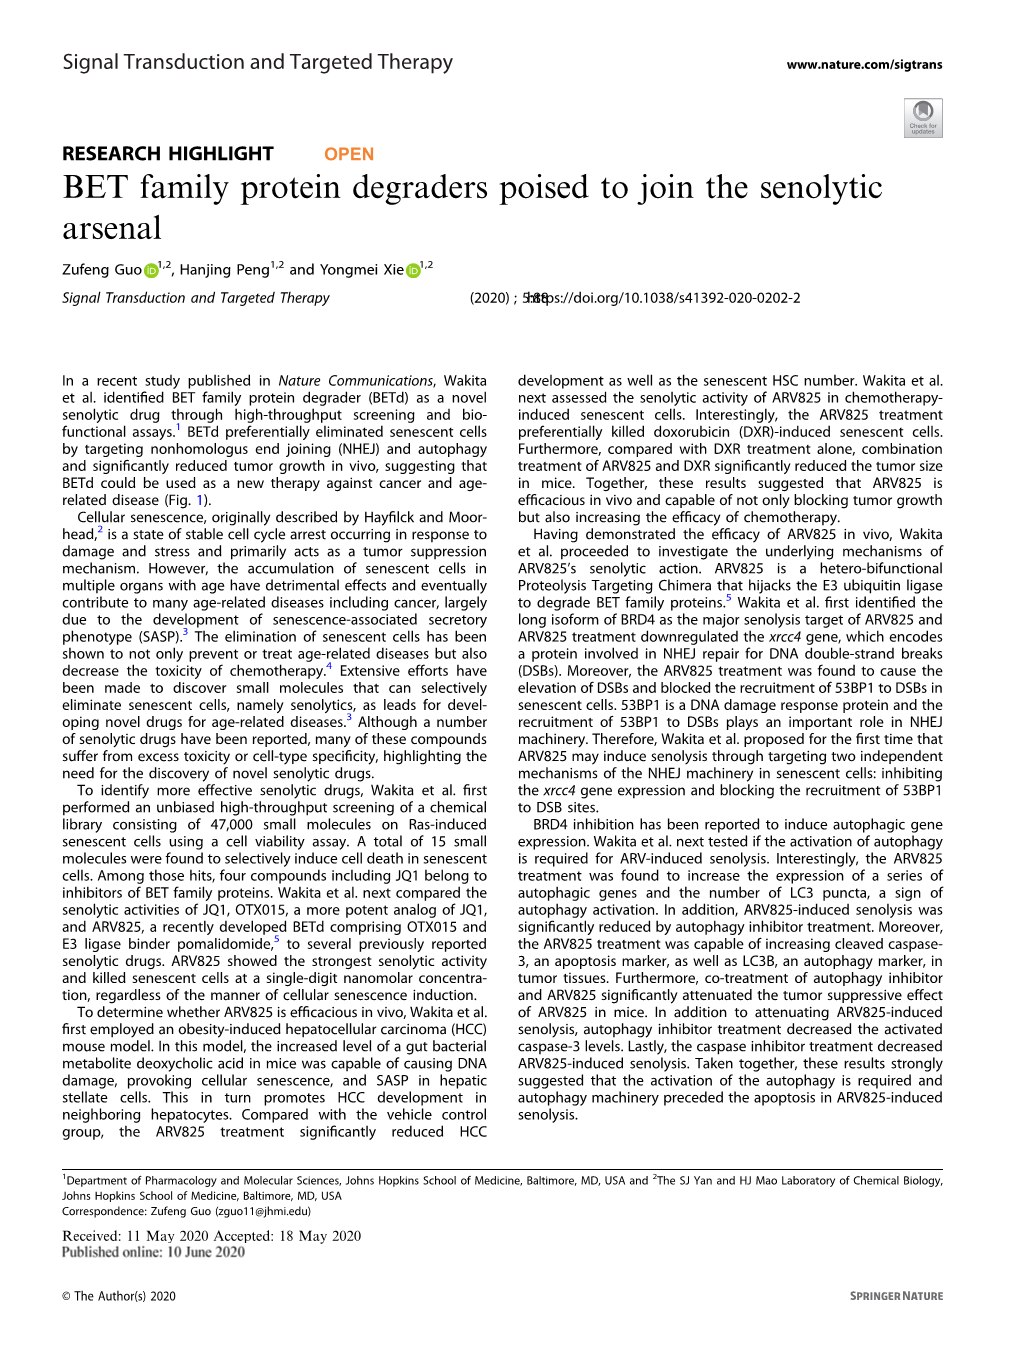 BET Family Protein Degraders Poised to Join the Senolytic Arsenal